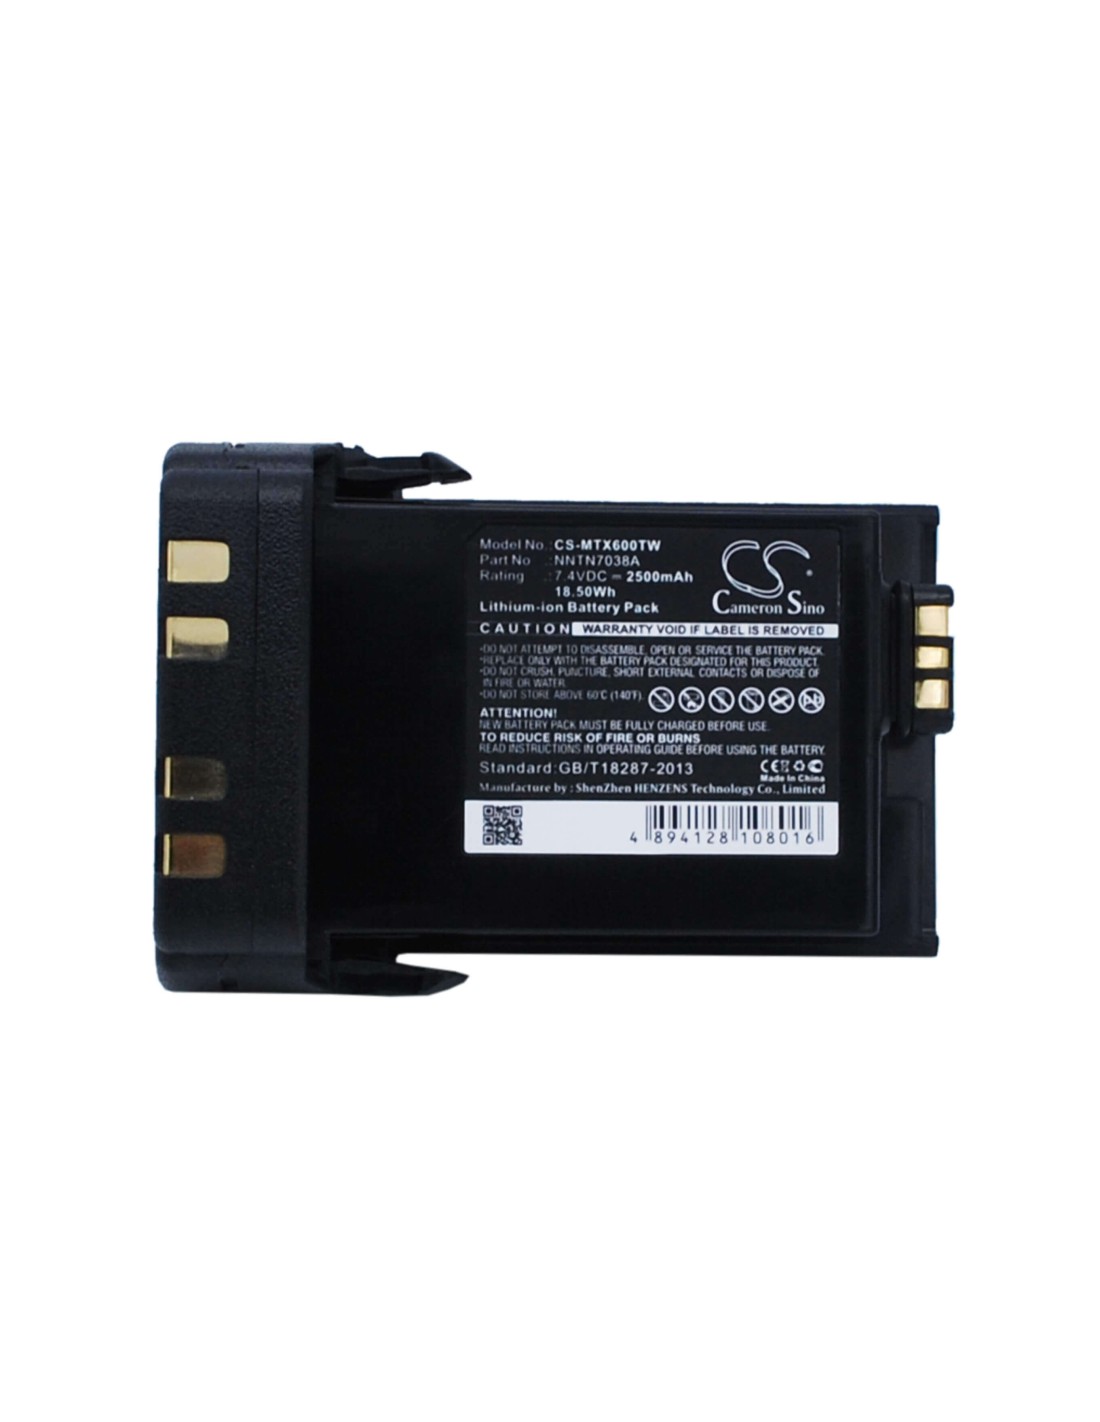 Battery for Motorola Apx6000, Apx7000, Apx8000 7.4V, 2500mAh - 18.50Wh